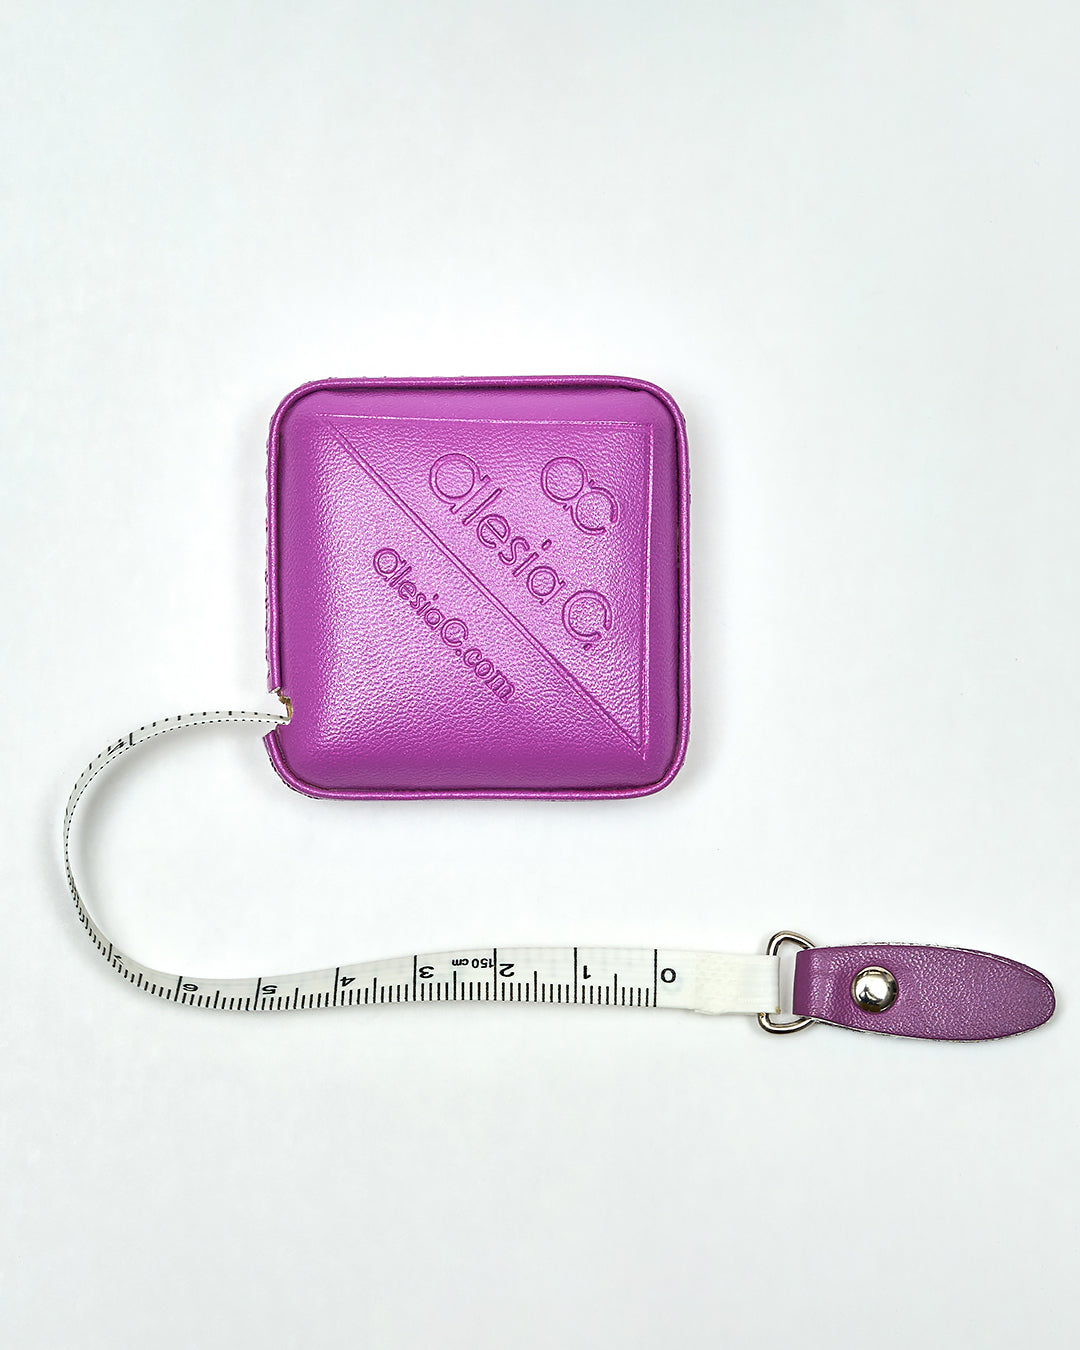 Designer Signature Purple Leather Tape Measure in centimeters and inches by Alesia Chaika